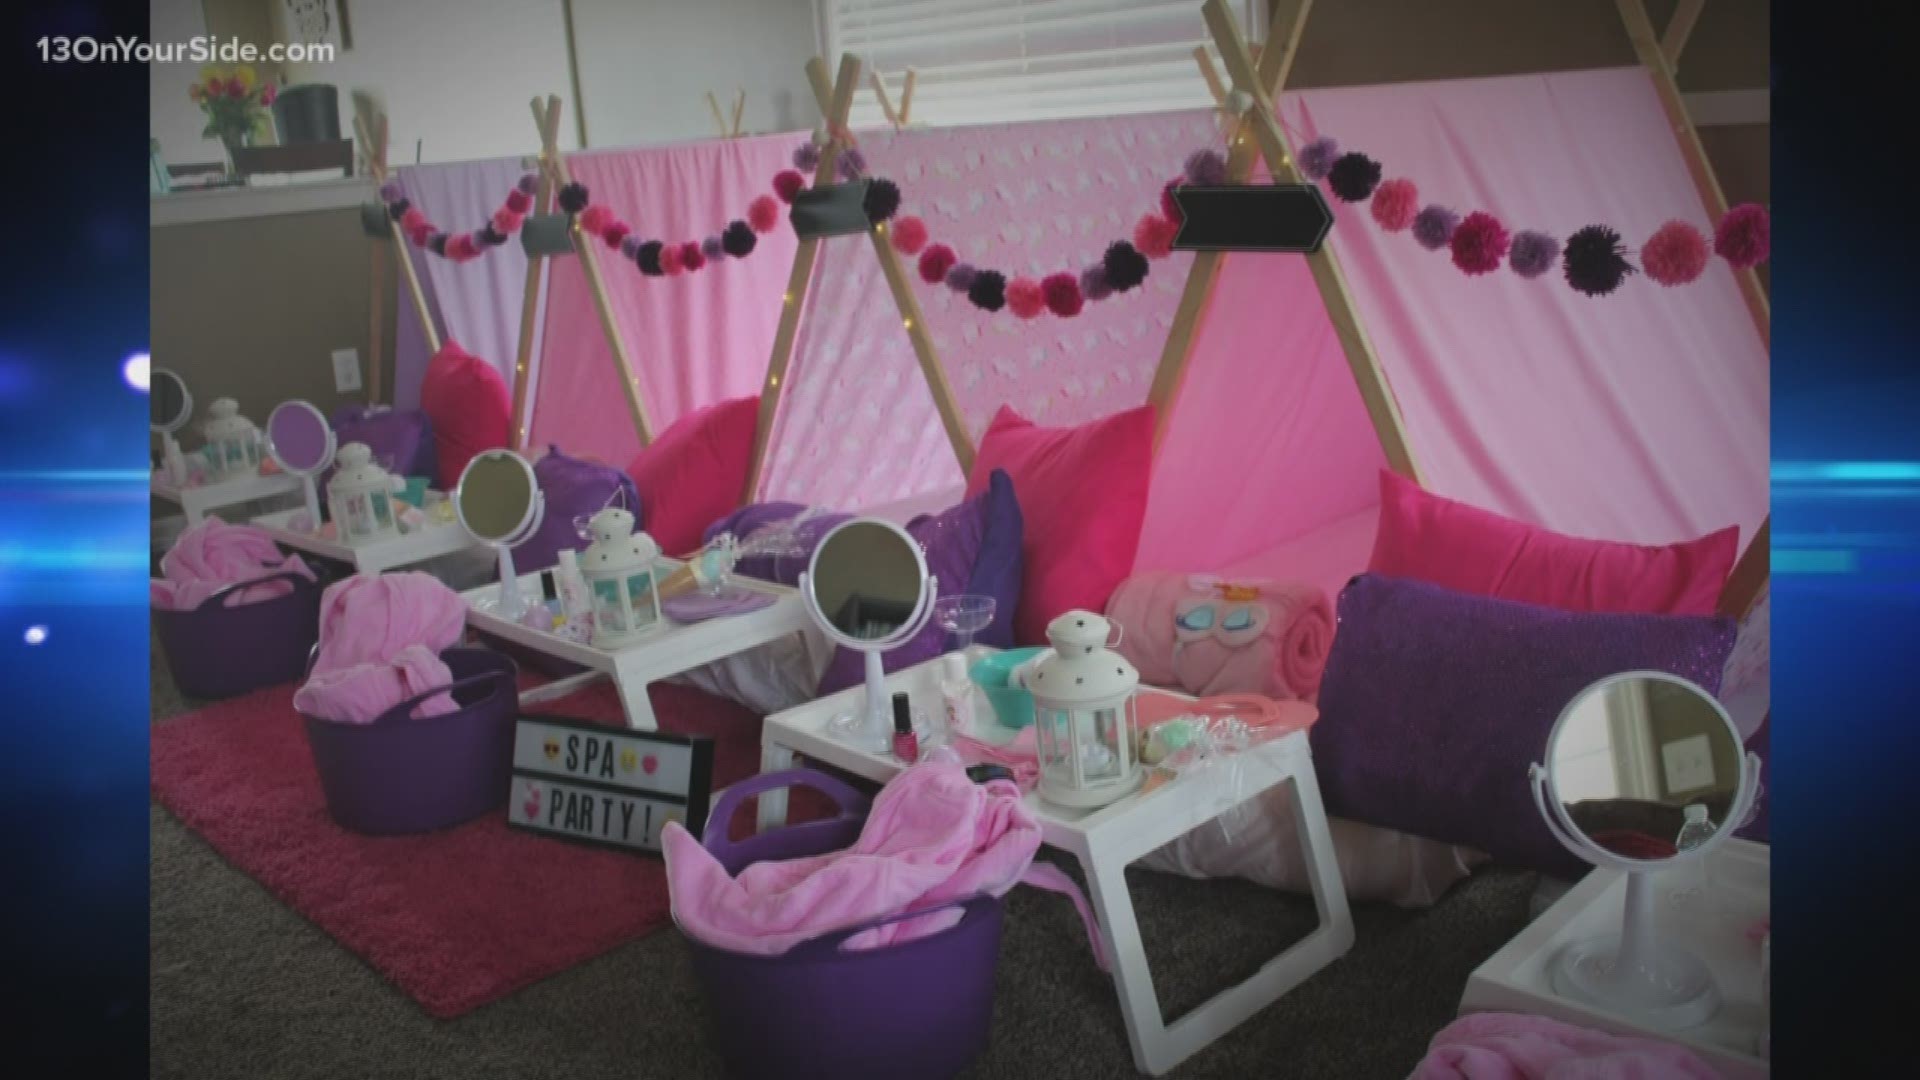 Little Dreamers Sleepovers offers sleepover party ideas for any occasion